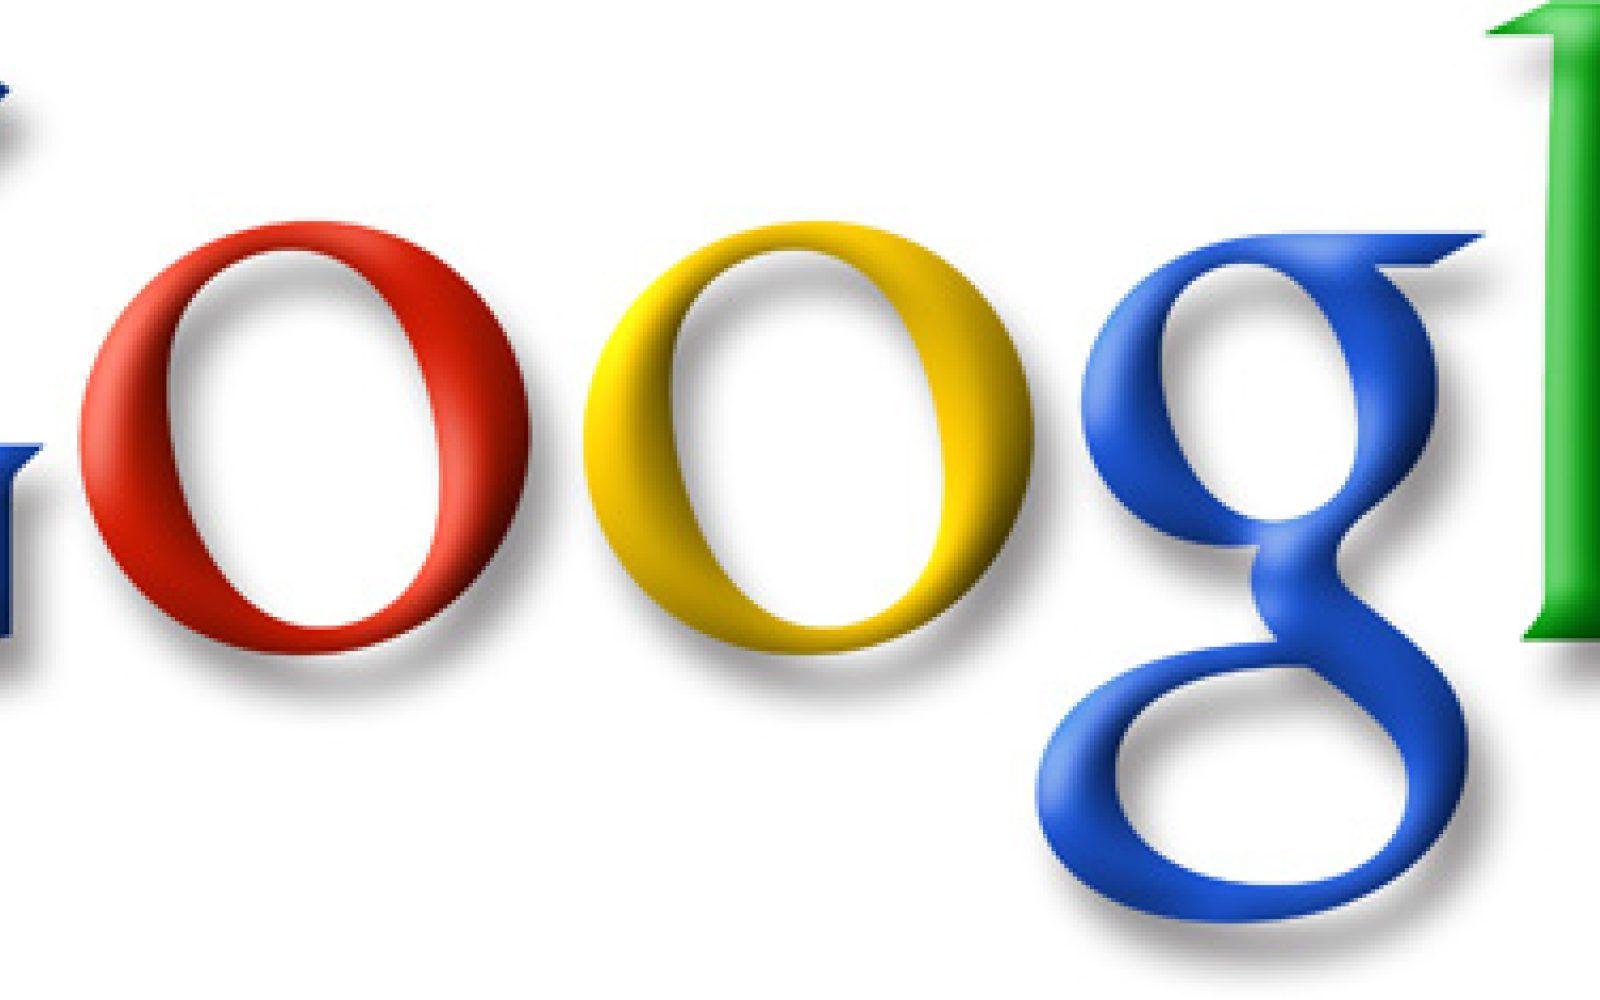 Mess with Google Logo - Google tries to buy its way out of patent mess | 9to5Mac